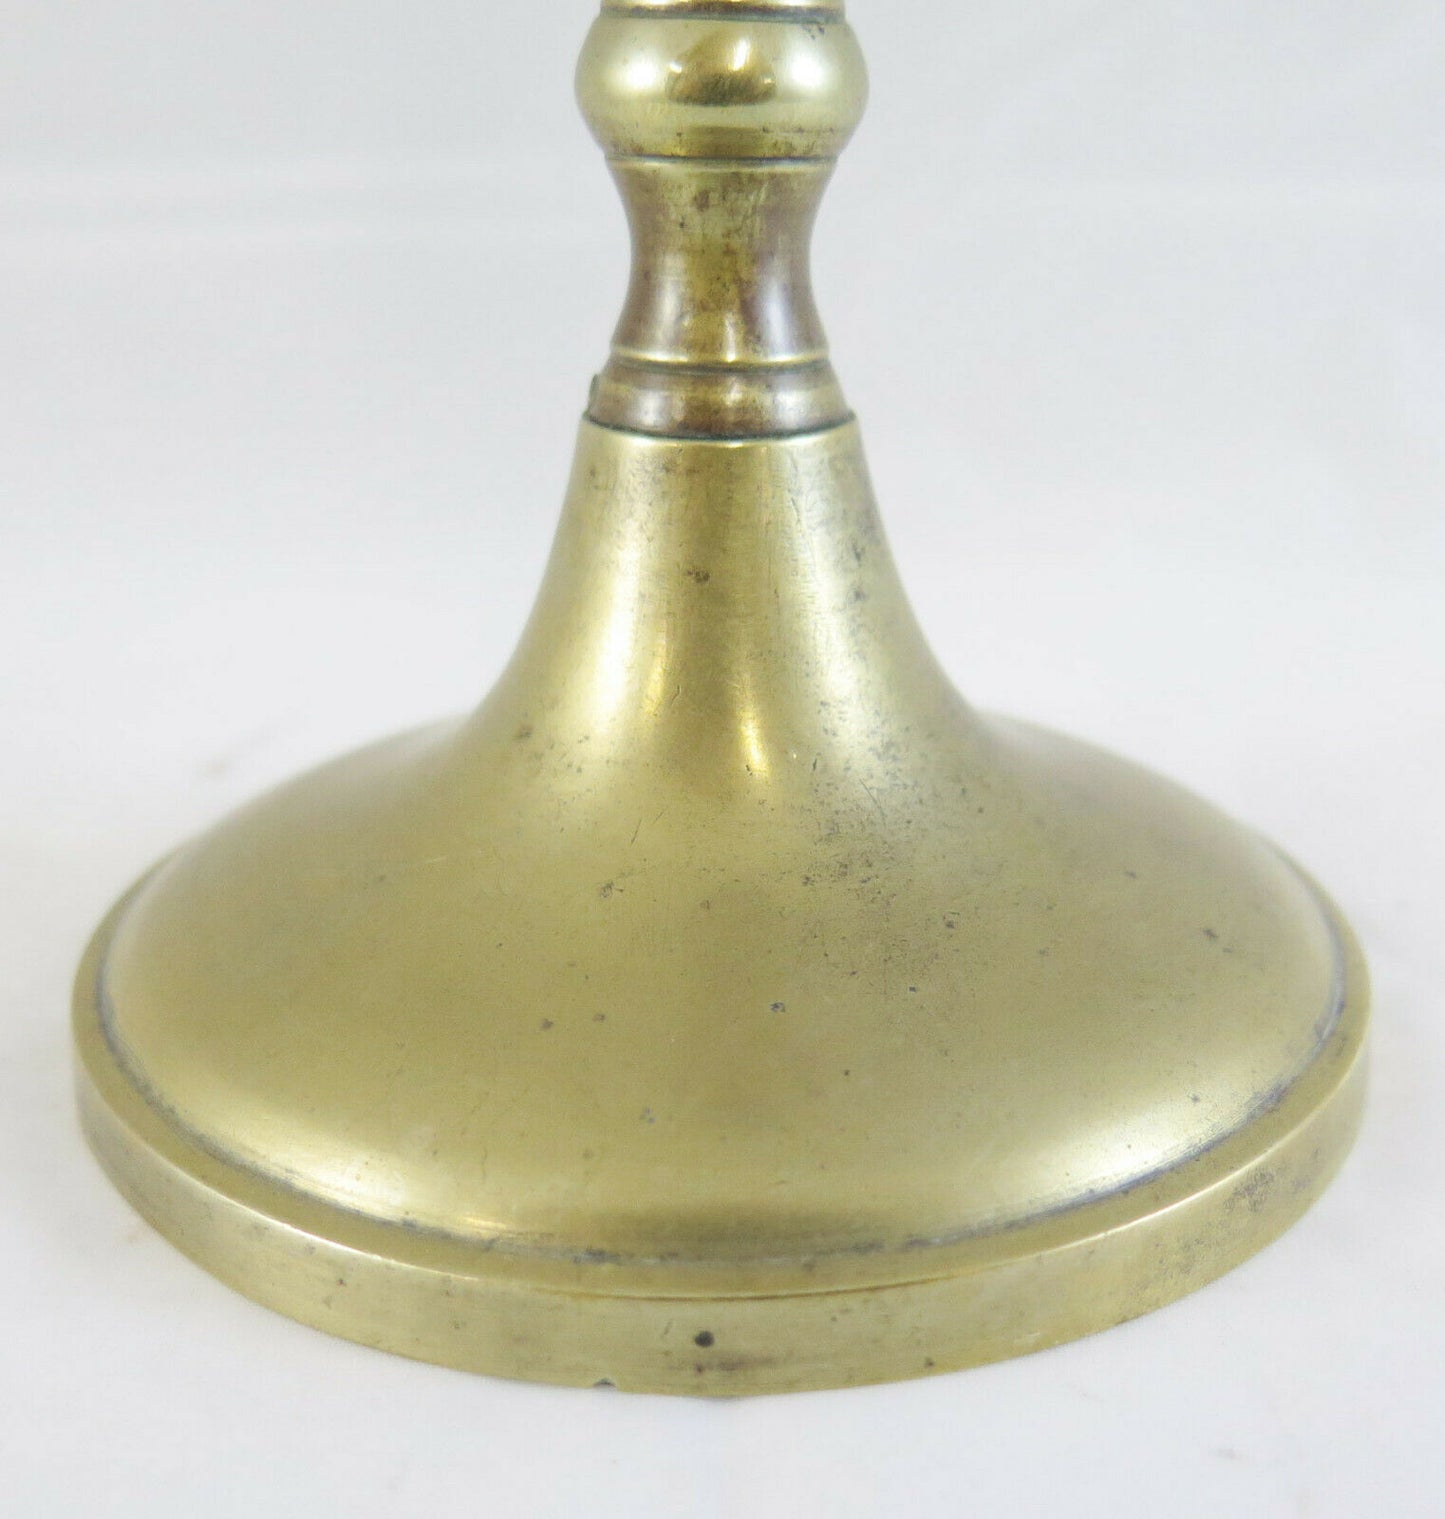 ANTIQUE 19TH CENTURY GOLDEN AND TURNED BRASS TORCH CANDLESTICK G13 LIGHT 